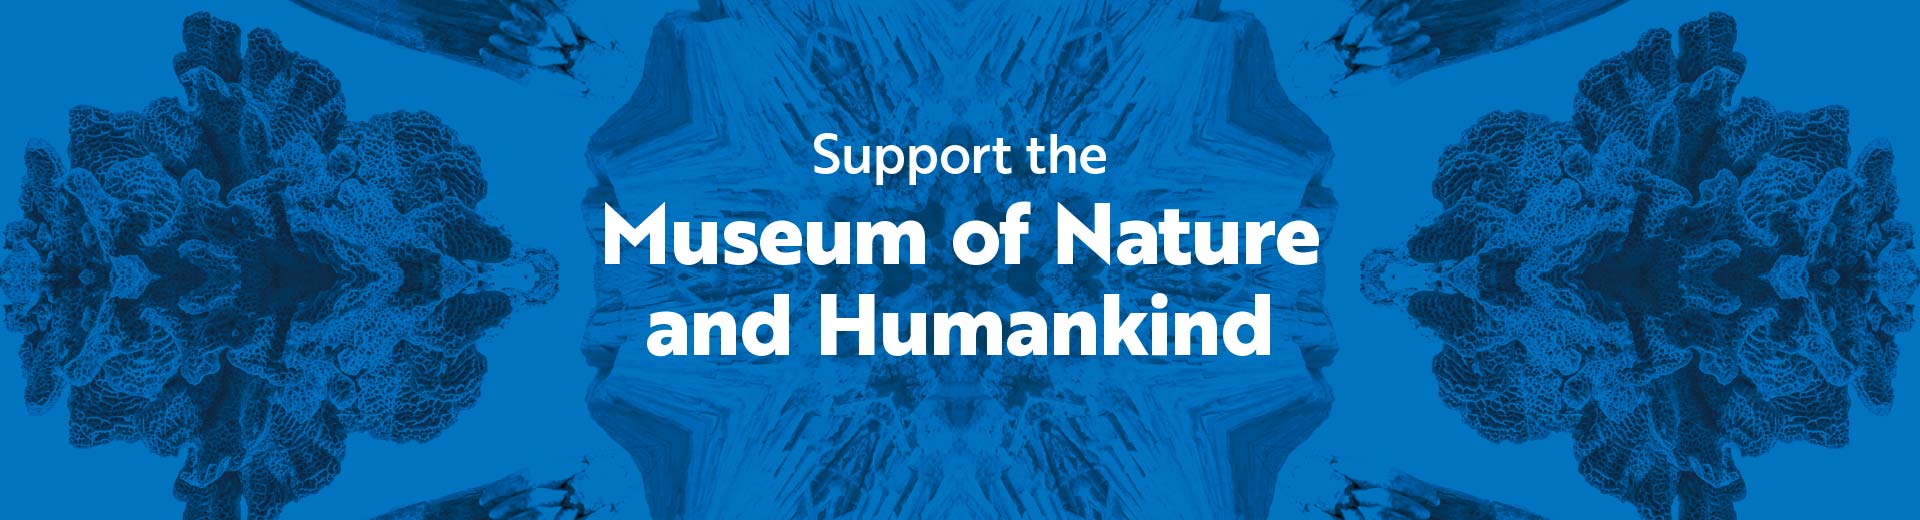 Support the Museum of Nature and Humanekind